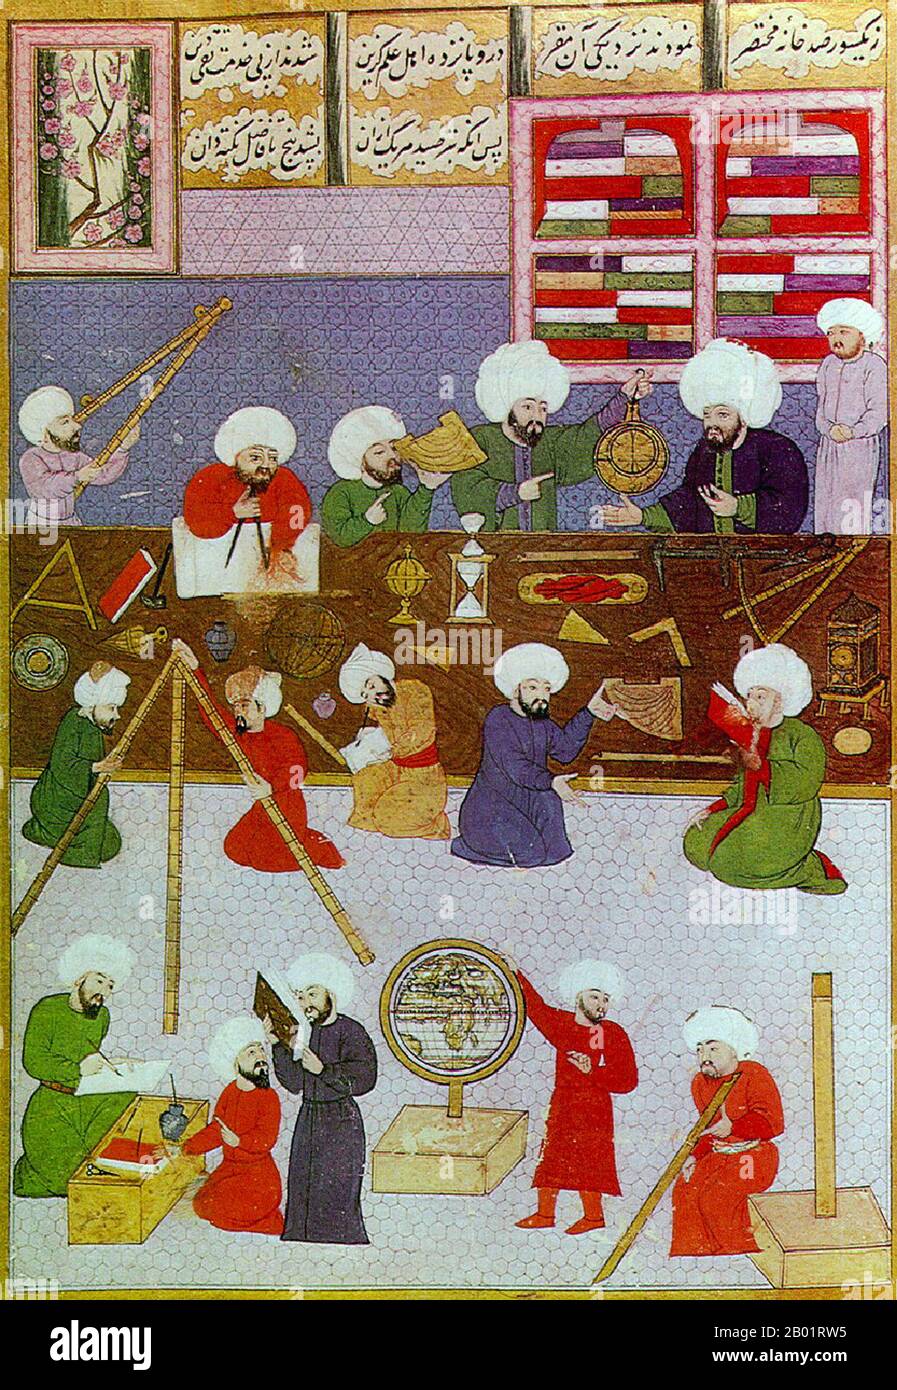 Turkey: Ottoman astronomers at work around Taqi al-Din at the Istanbul Observatory. Miniature painting from the Shahinshah-nama (History of the King of Kings), an epic poem by 'Ala ad-Din Mansur-Shirazi, c. 1574-1595.  Taqi al-Din Muhammad ibn Ma'ruf al-Shami al-Asadi (1526-1585) was an Ottoman Turkish Muslim polymath. He was the author of more than 90 books on a wide variety of subjects, including astronomy, clocks, engineering, mathematics, mechanics, optics and natural philosophy. Stock Photo